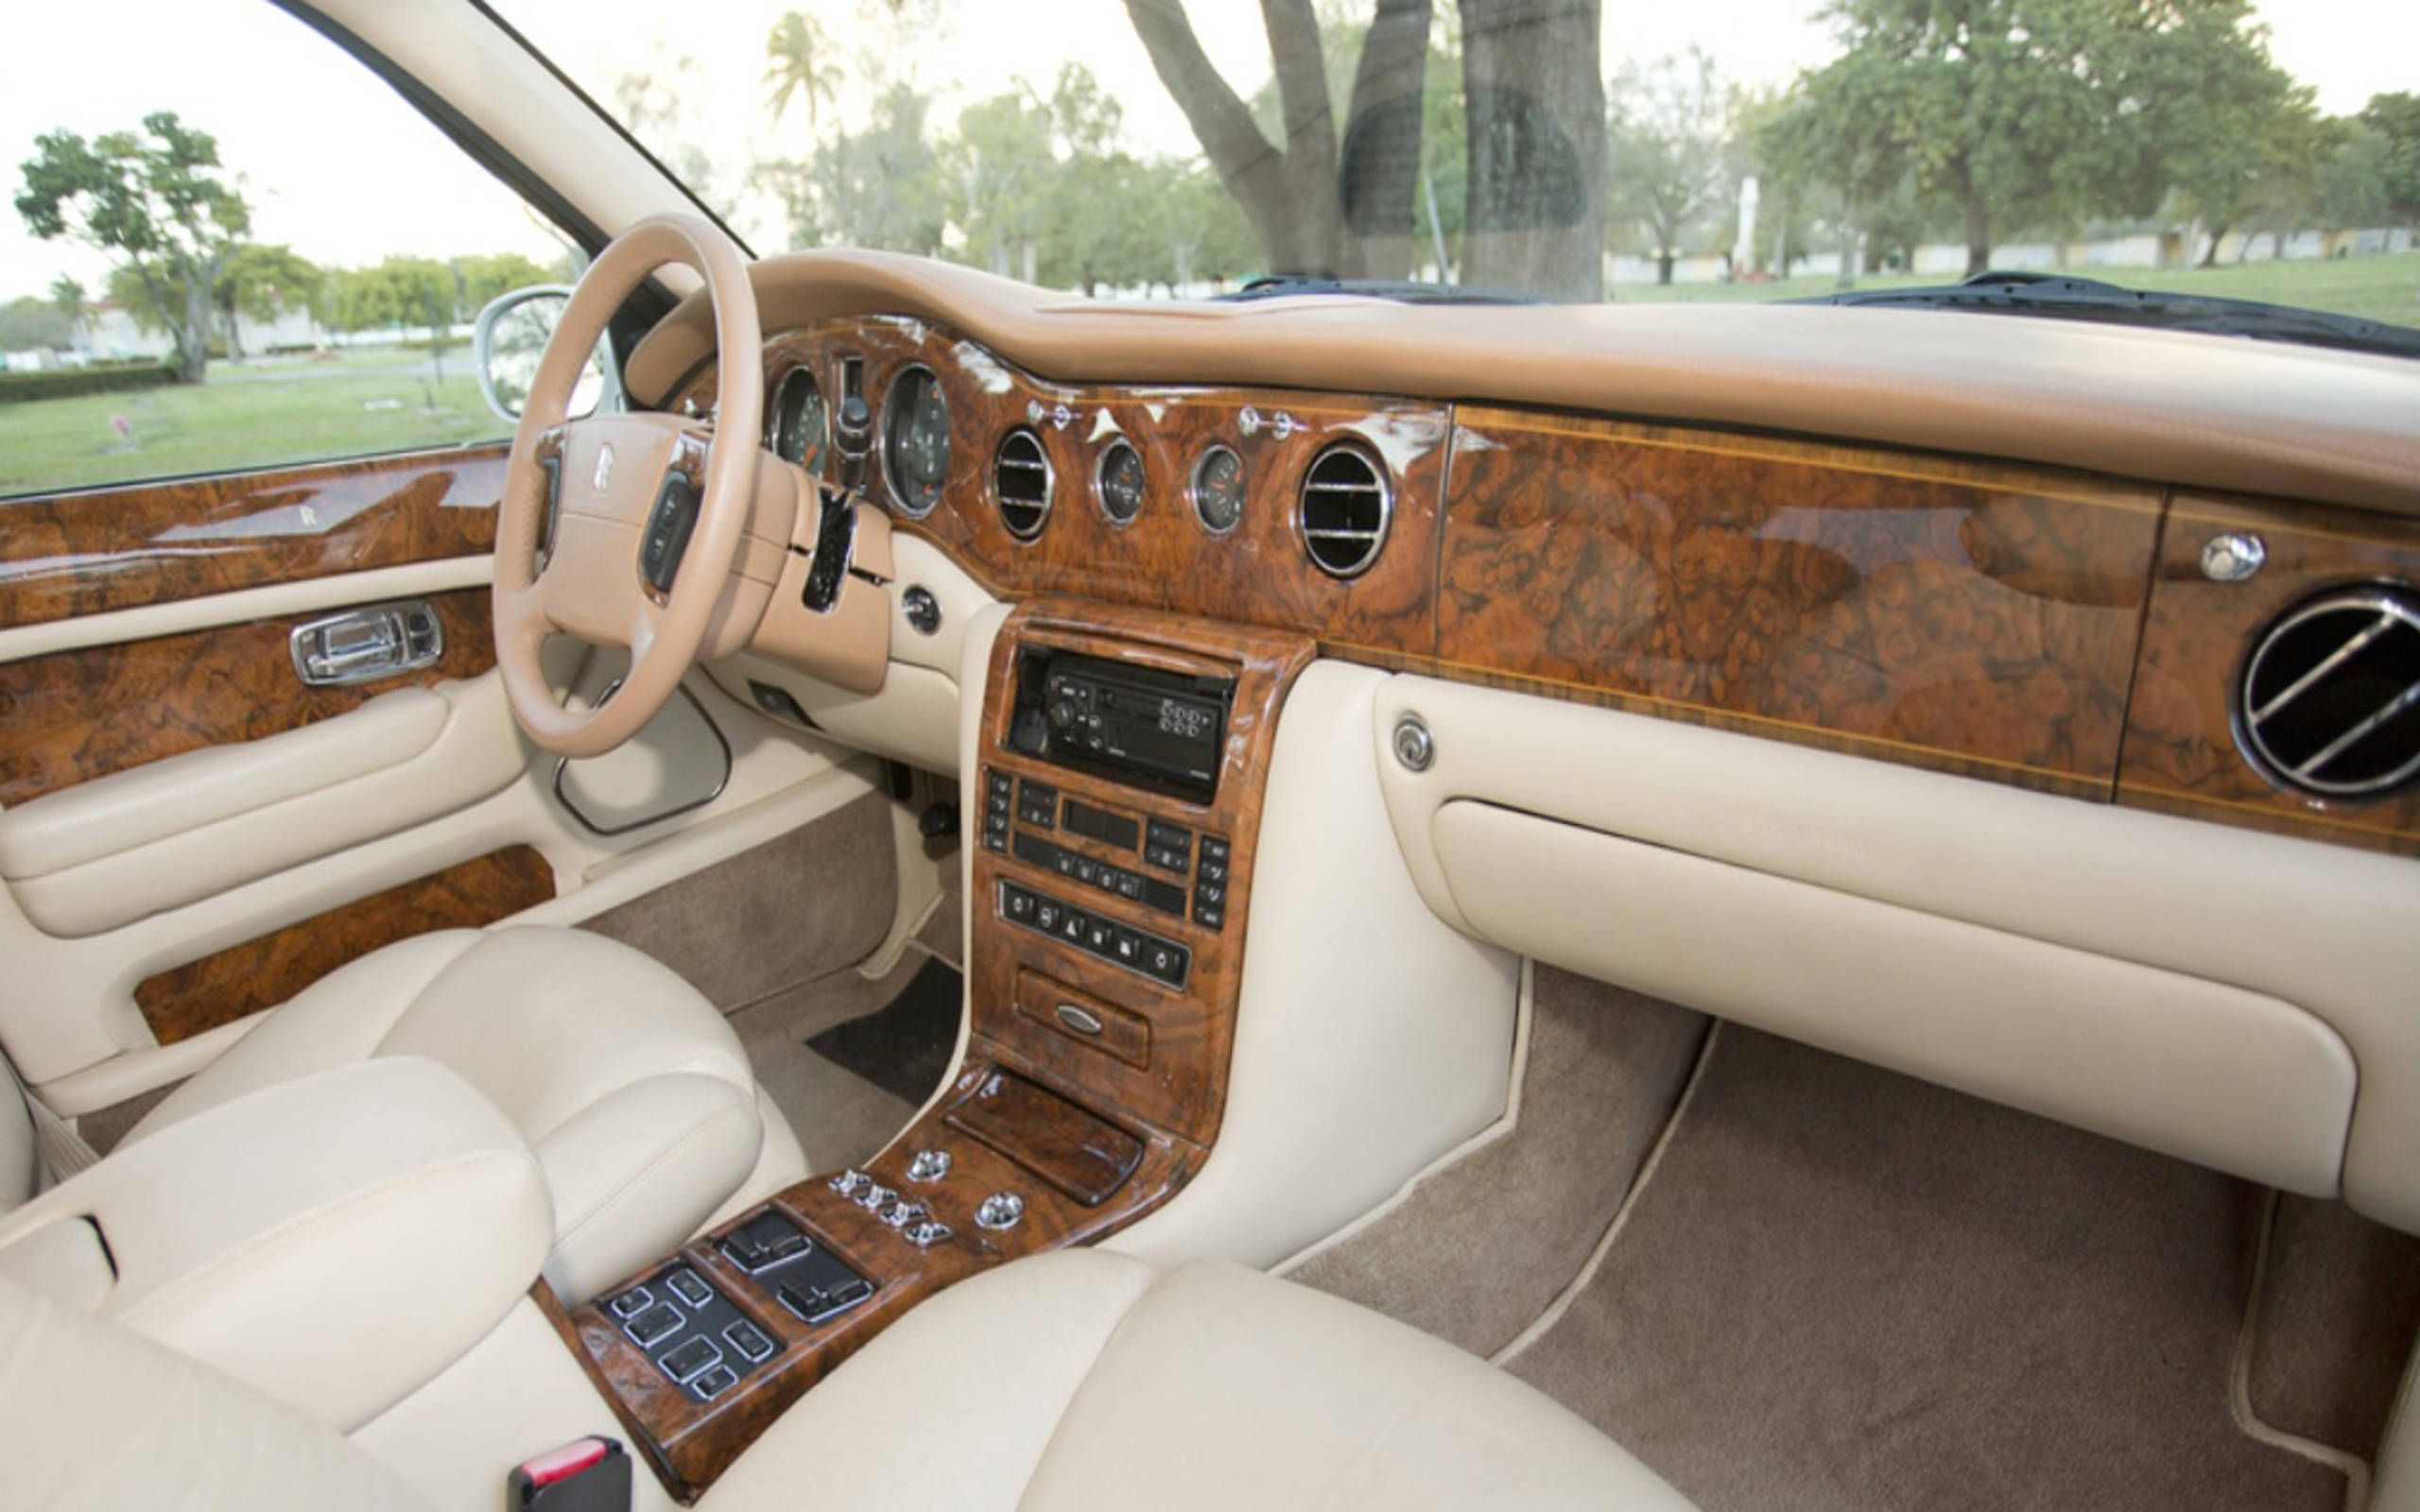 Used 2002 RollsRoyce Silver Seraph For Sale Special Pricing  Vantage  Motorworks Inc Stock 2CX08385